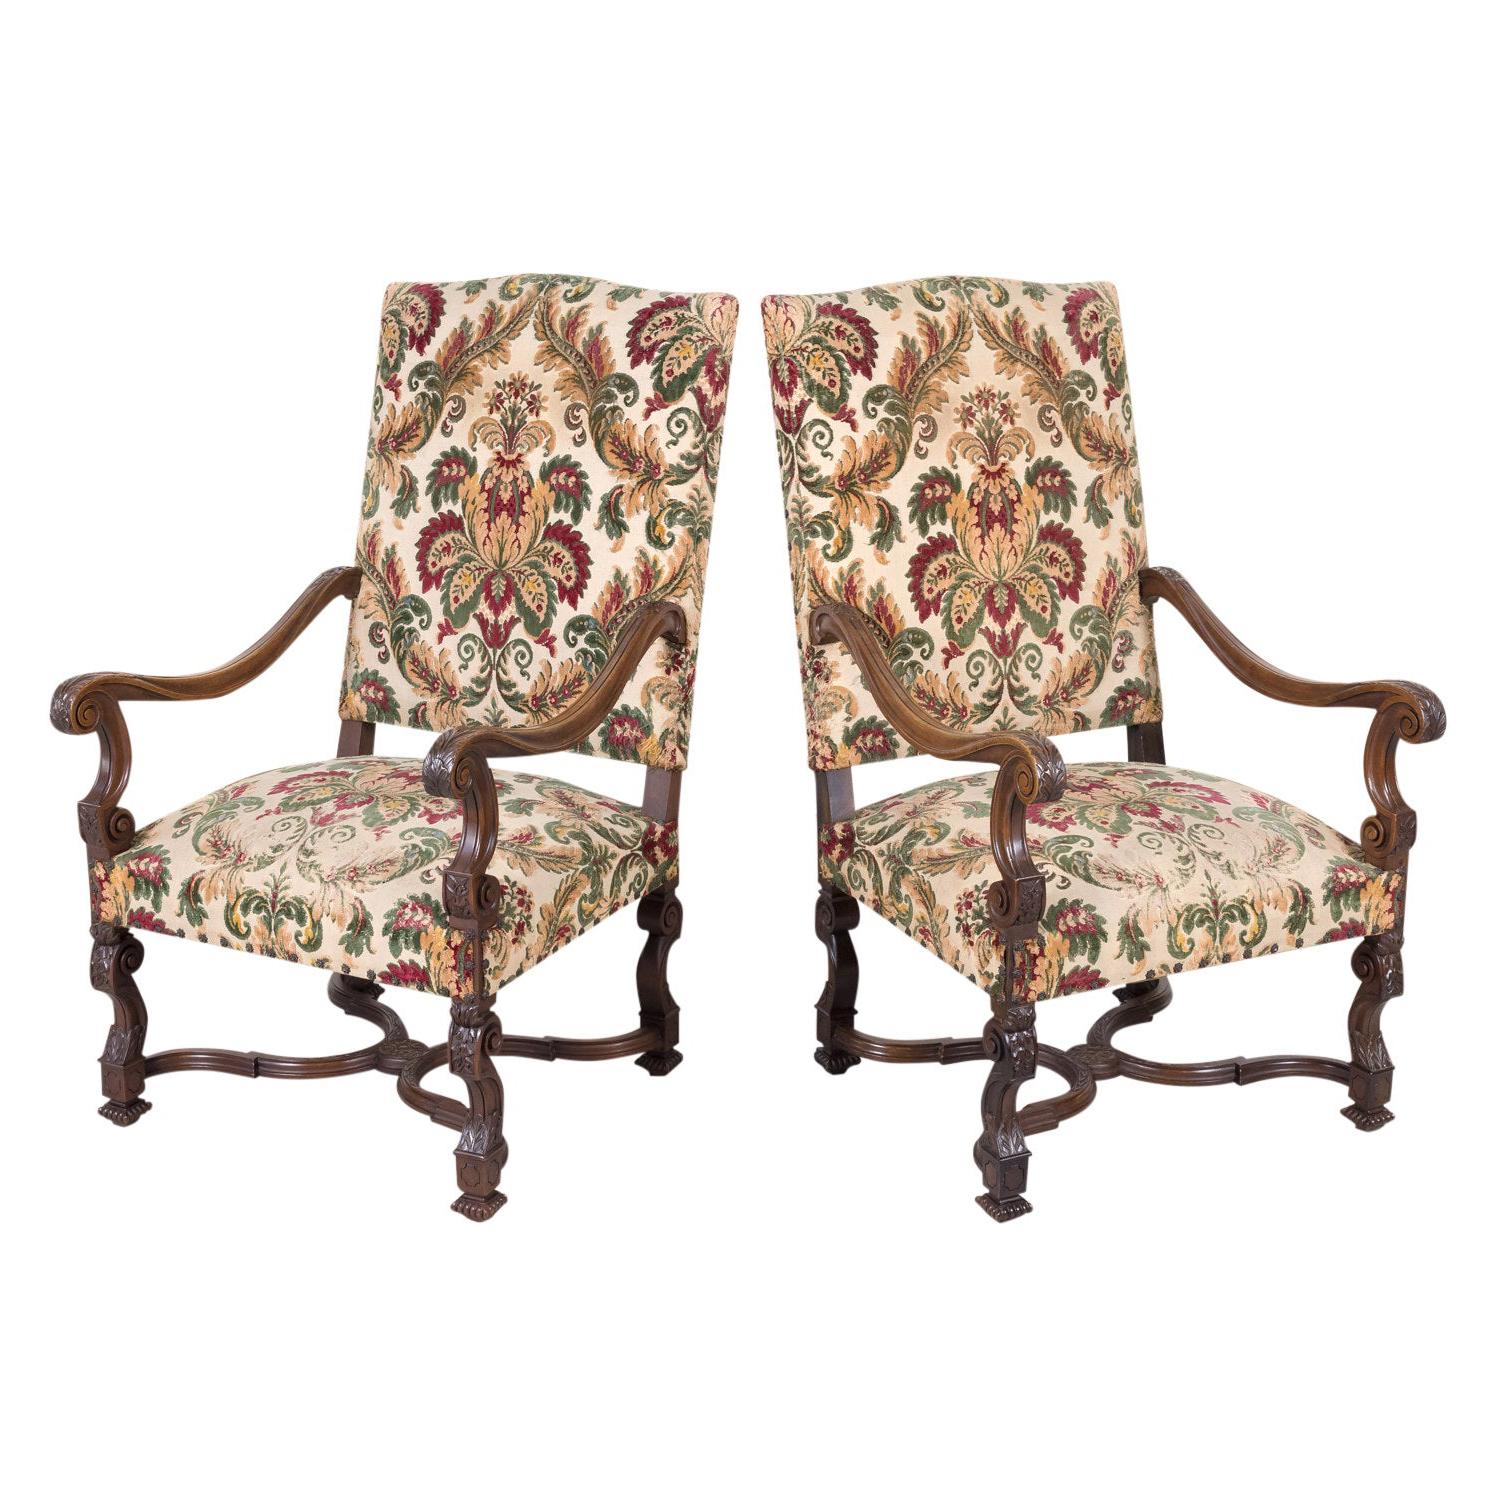 Pair of 19th Century French Louis XIV Style Carved Walnut Fauteuils For Sale